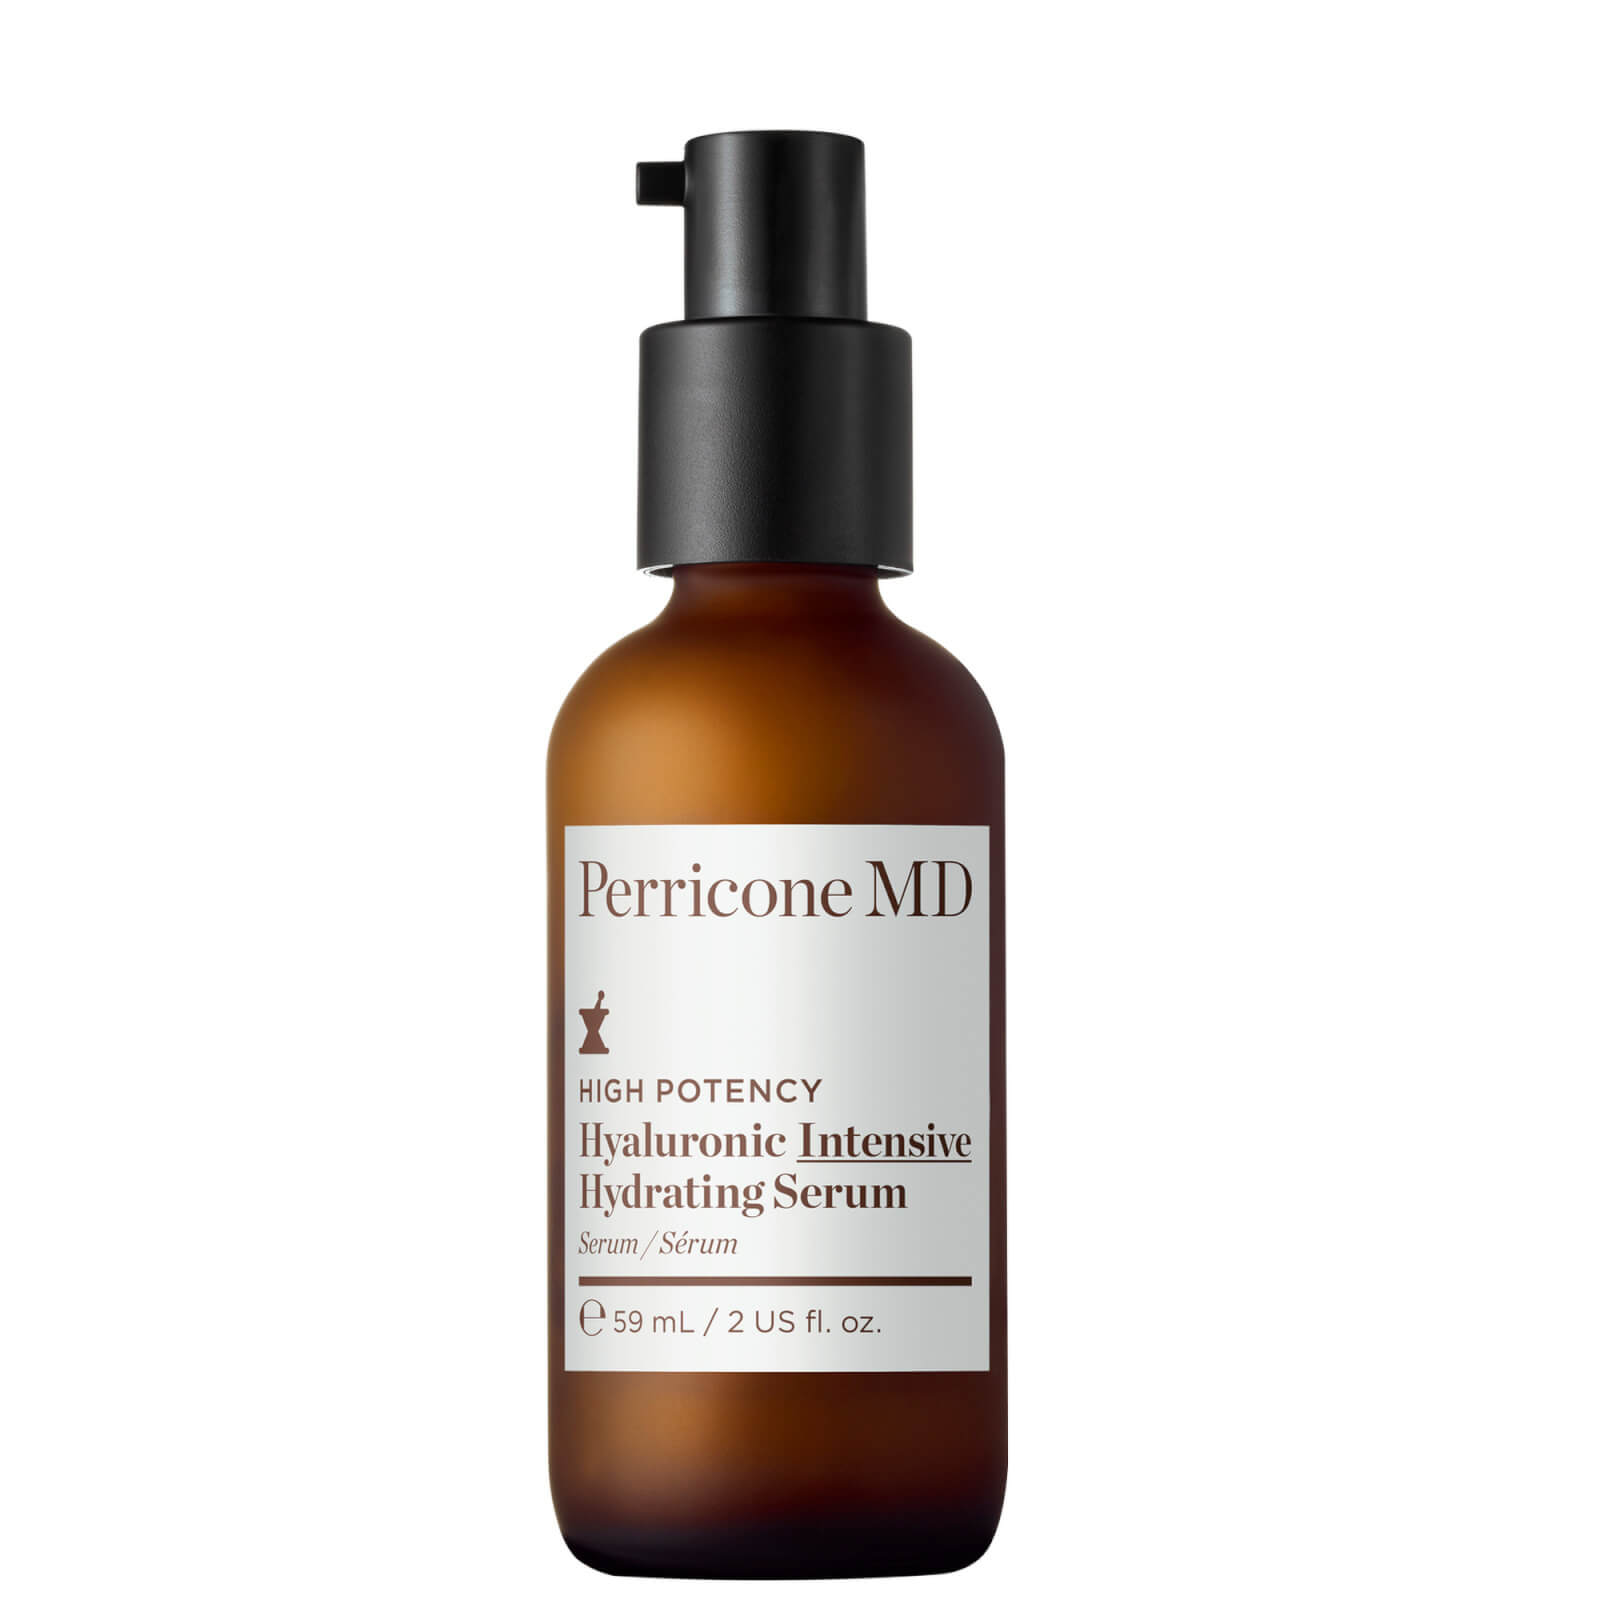 Perricone Md High Potency Hyaluronic Intensive Hydrating Serum